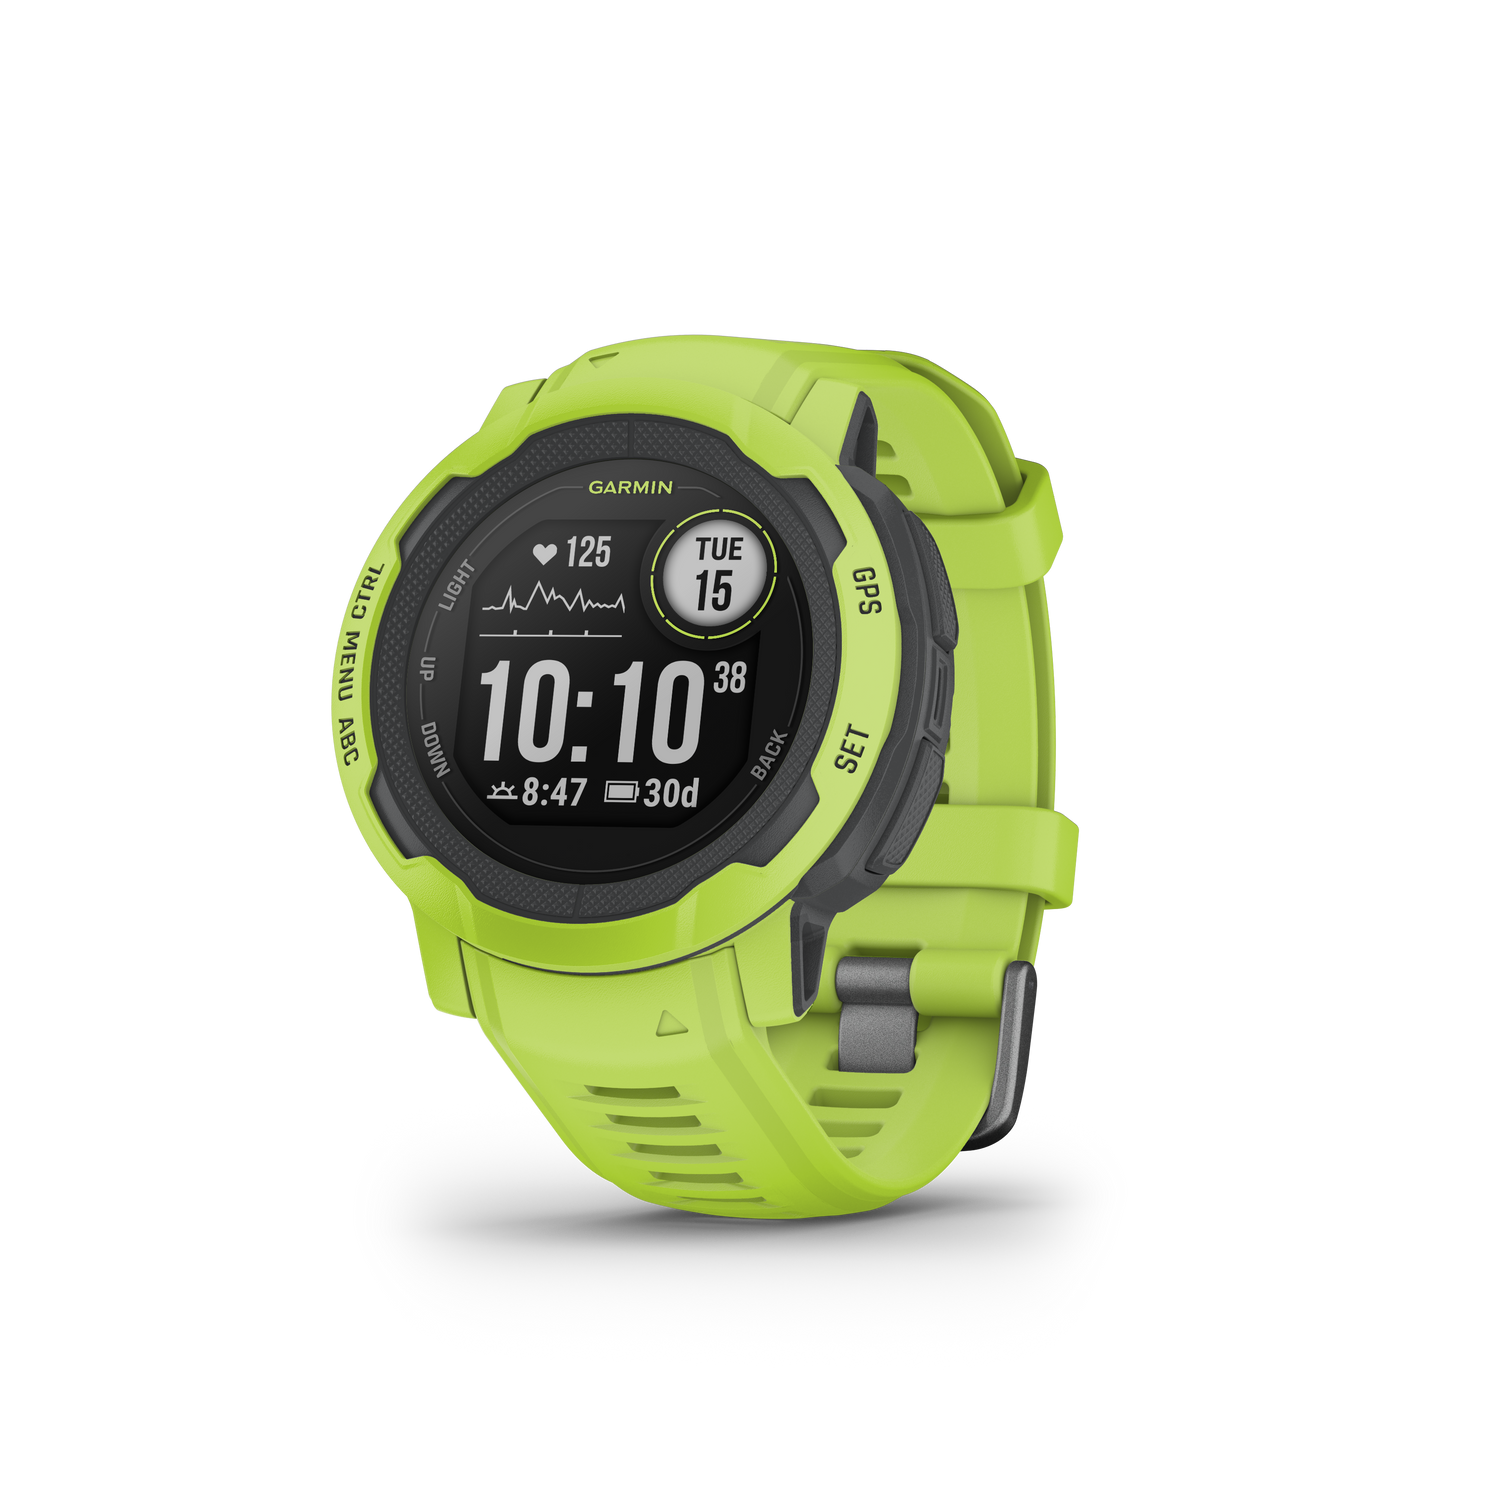 Garmin Instinct 2 official: cool smartwatches with long battery life (also for truck drivers)